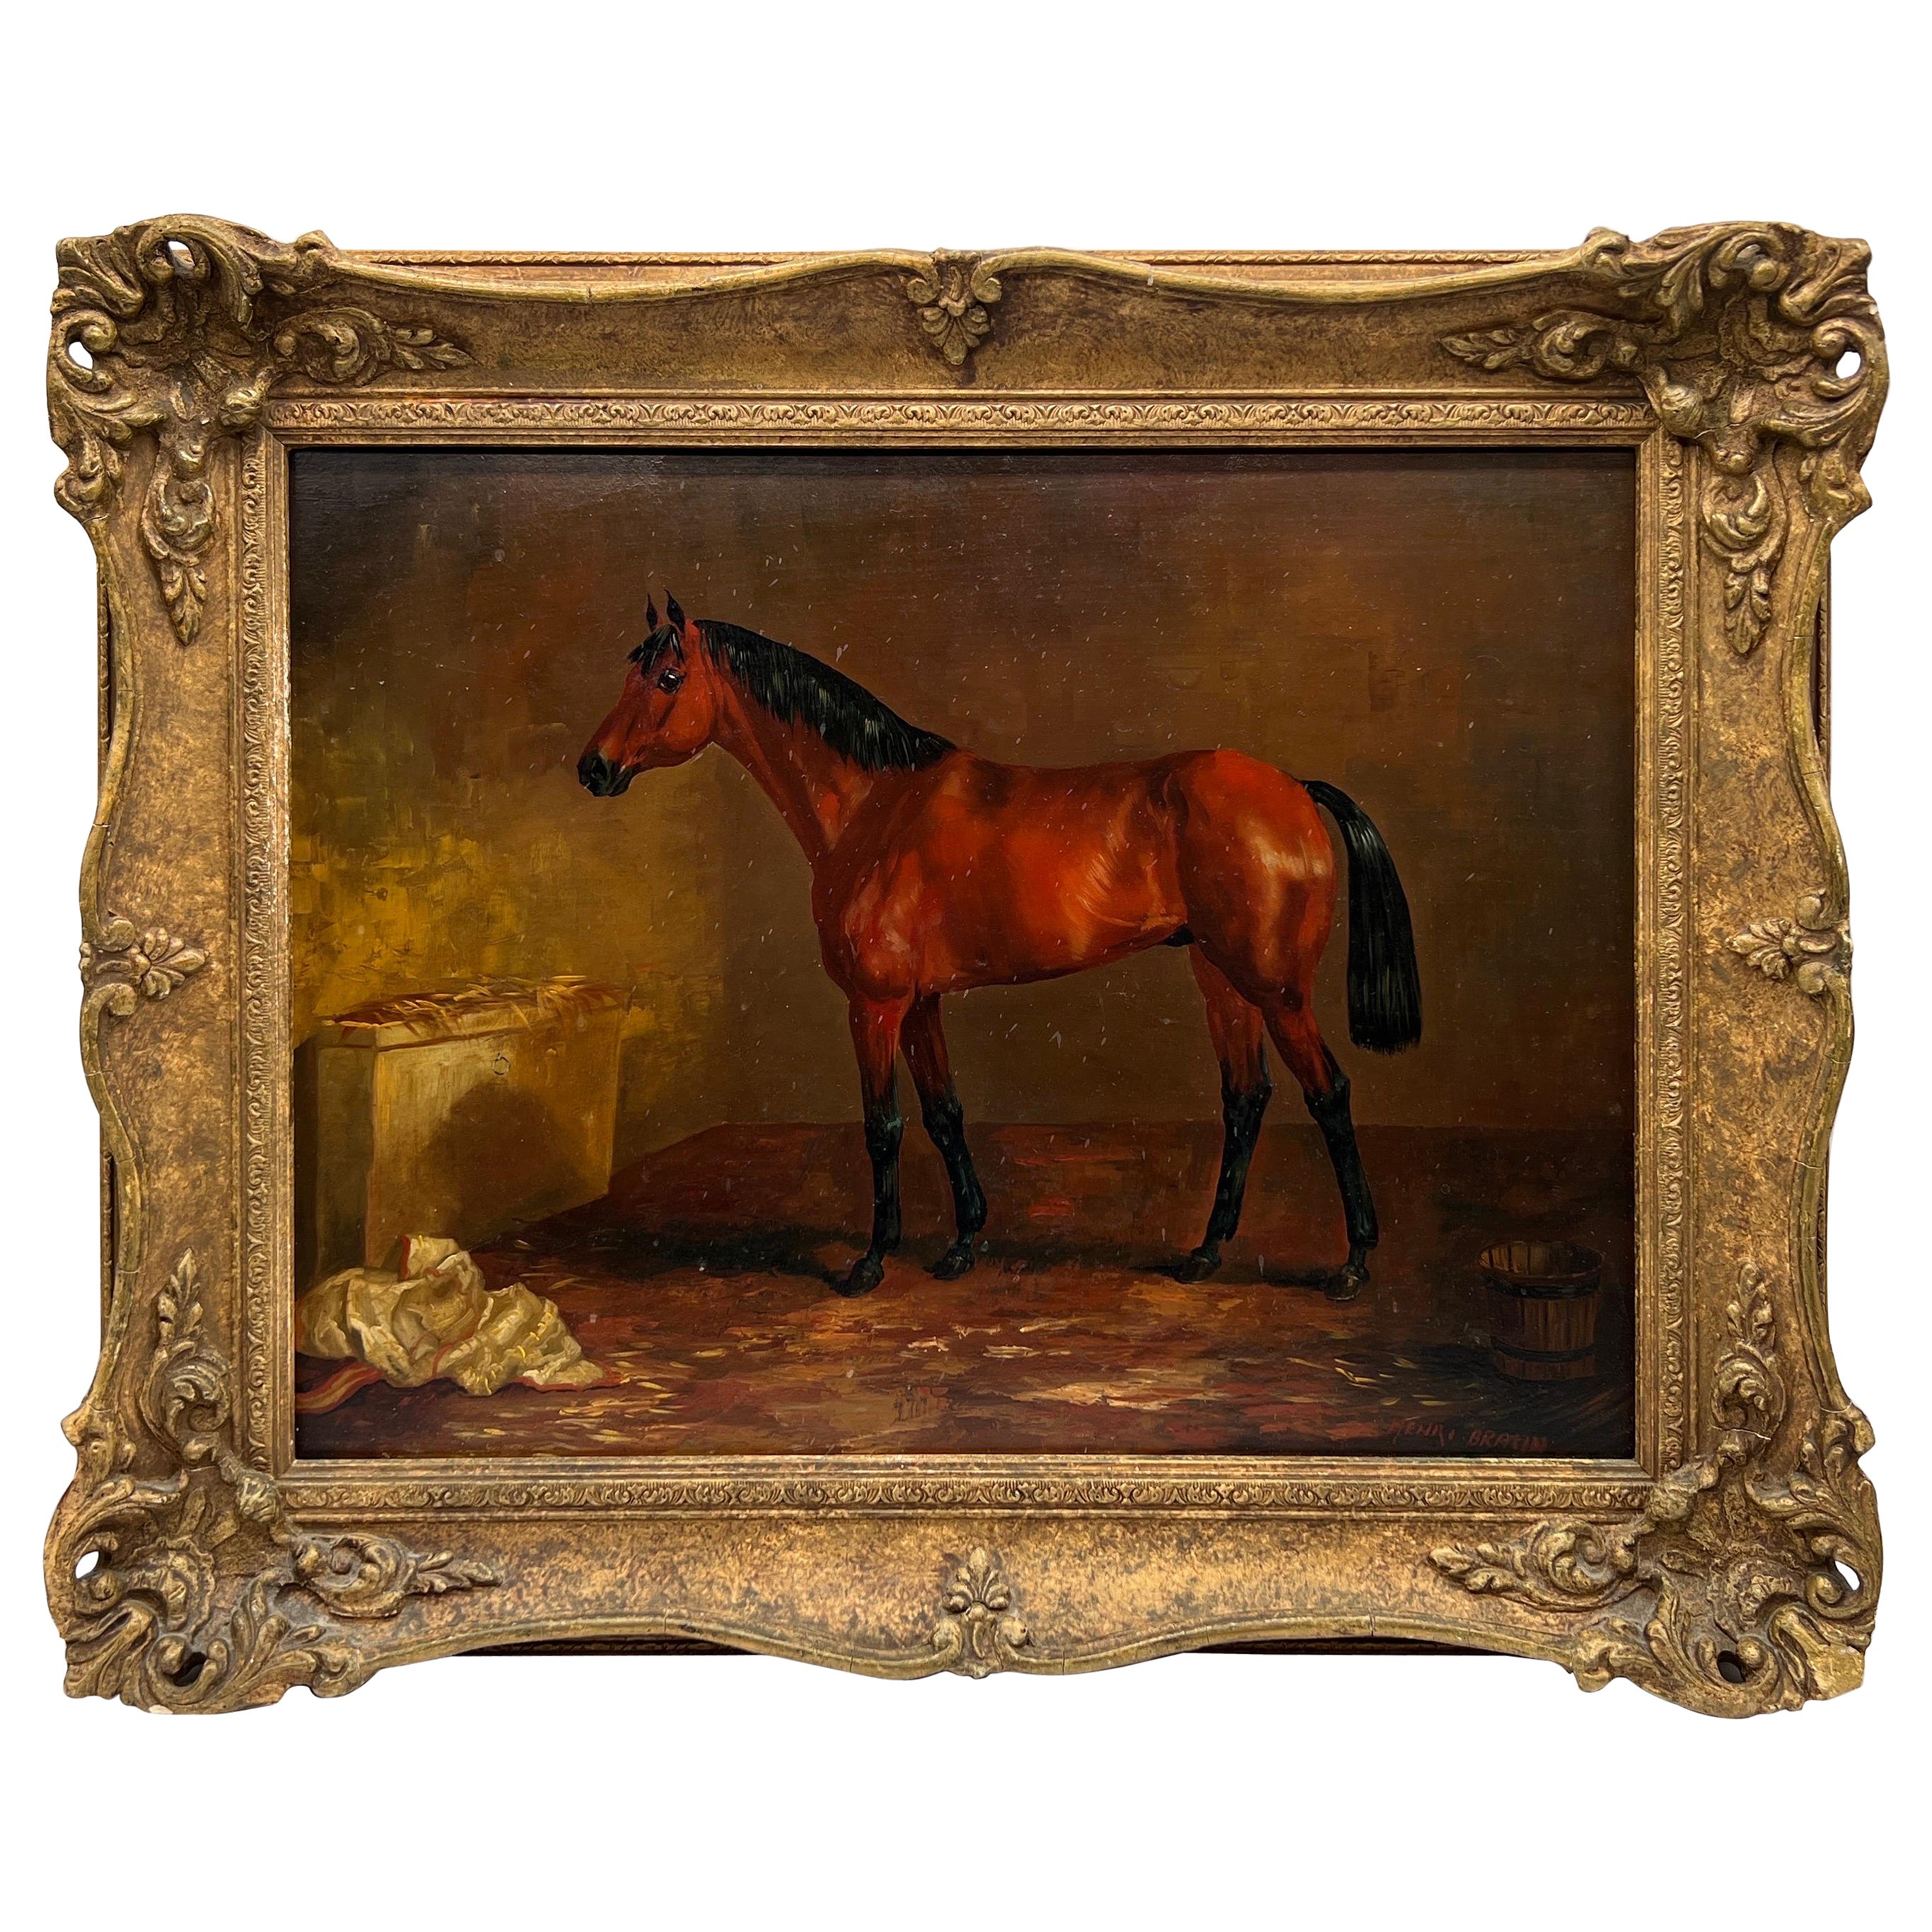 Henri Braun, Equestrian Race Horse in Stable Oil on Board C. 1905